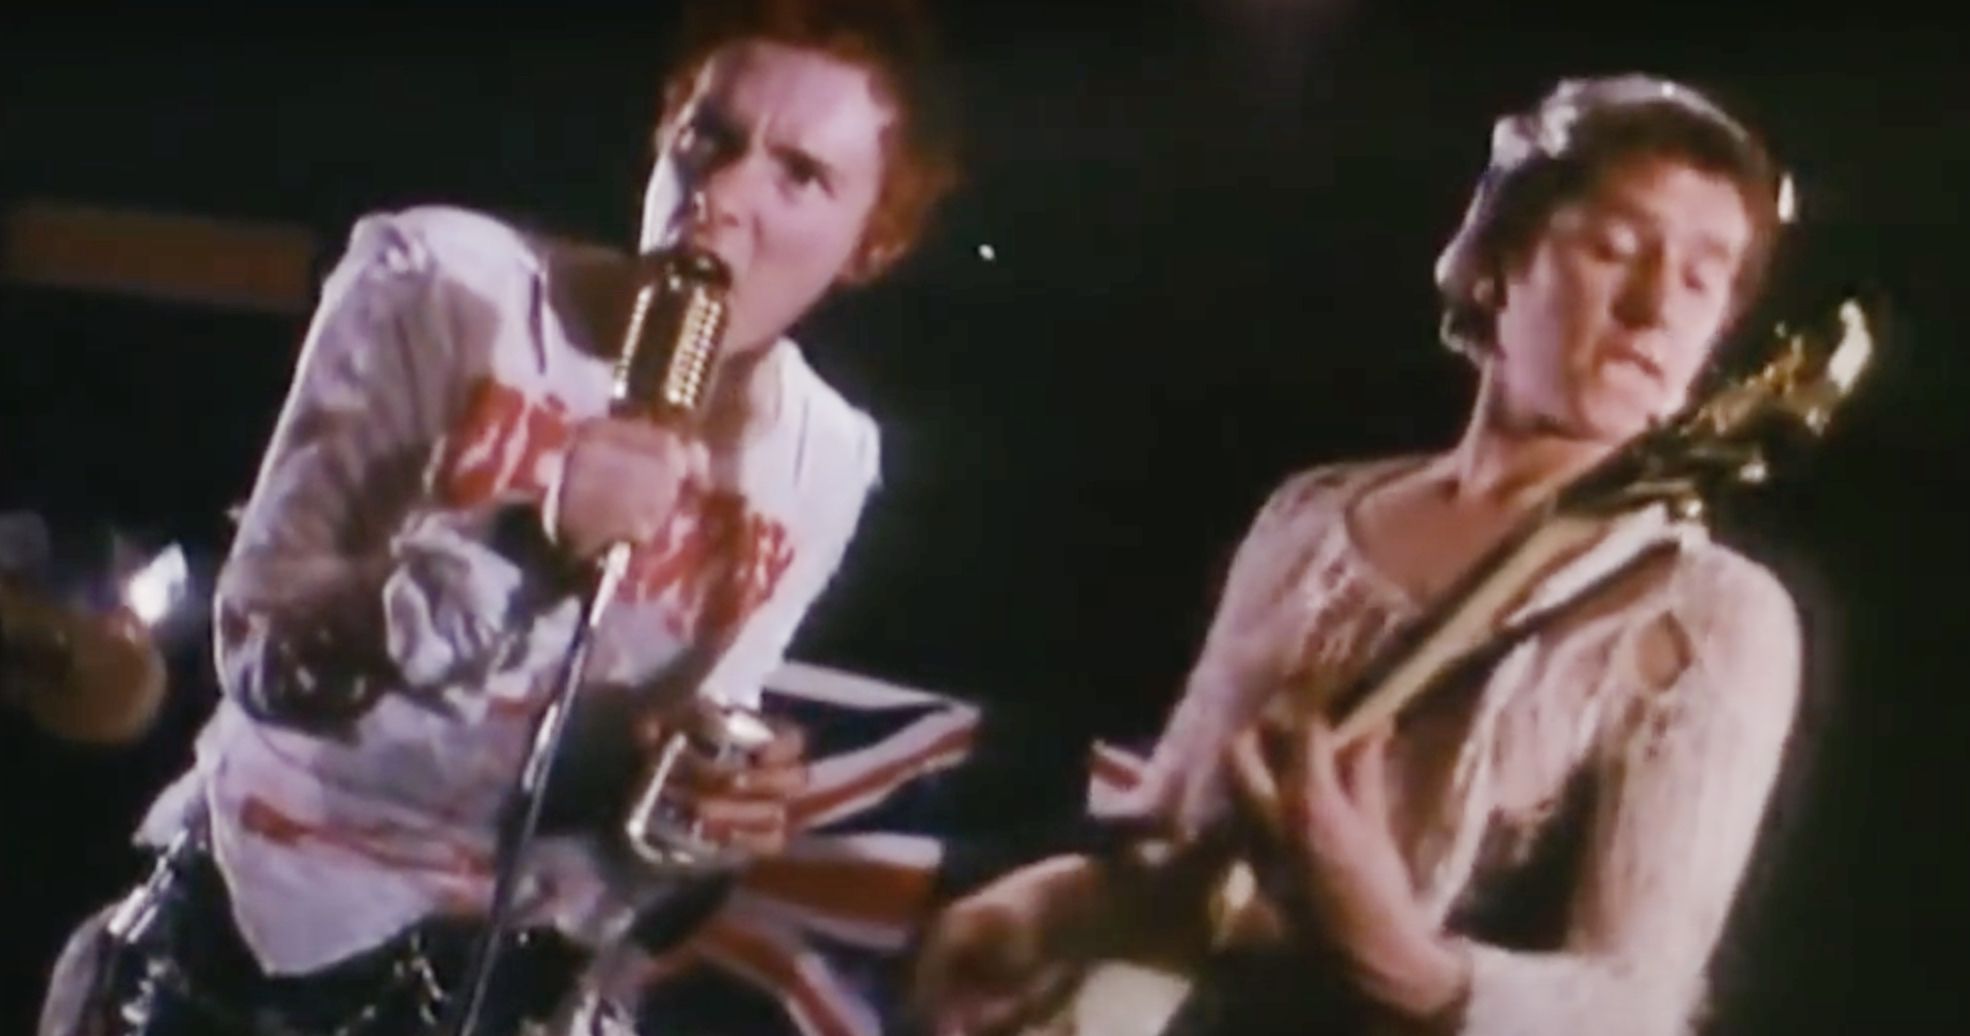 Sex Pistols Limited Series Is Happening at FX with Director Danny Boyle